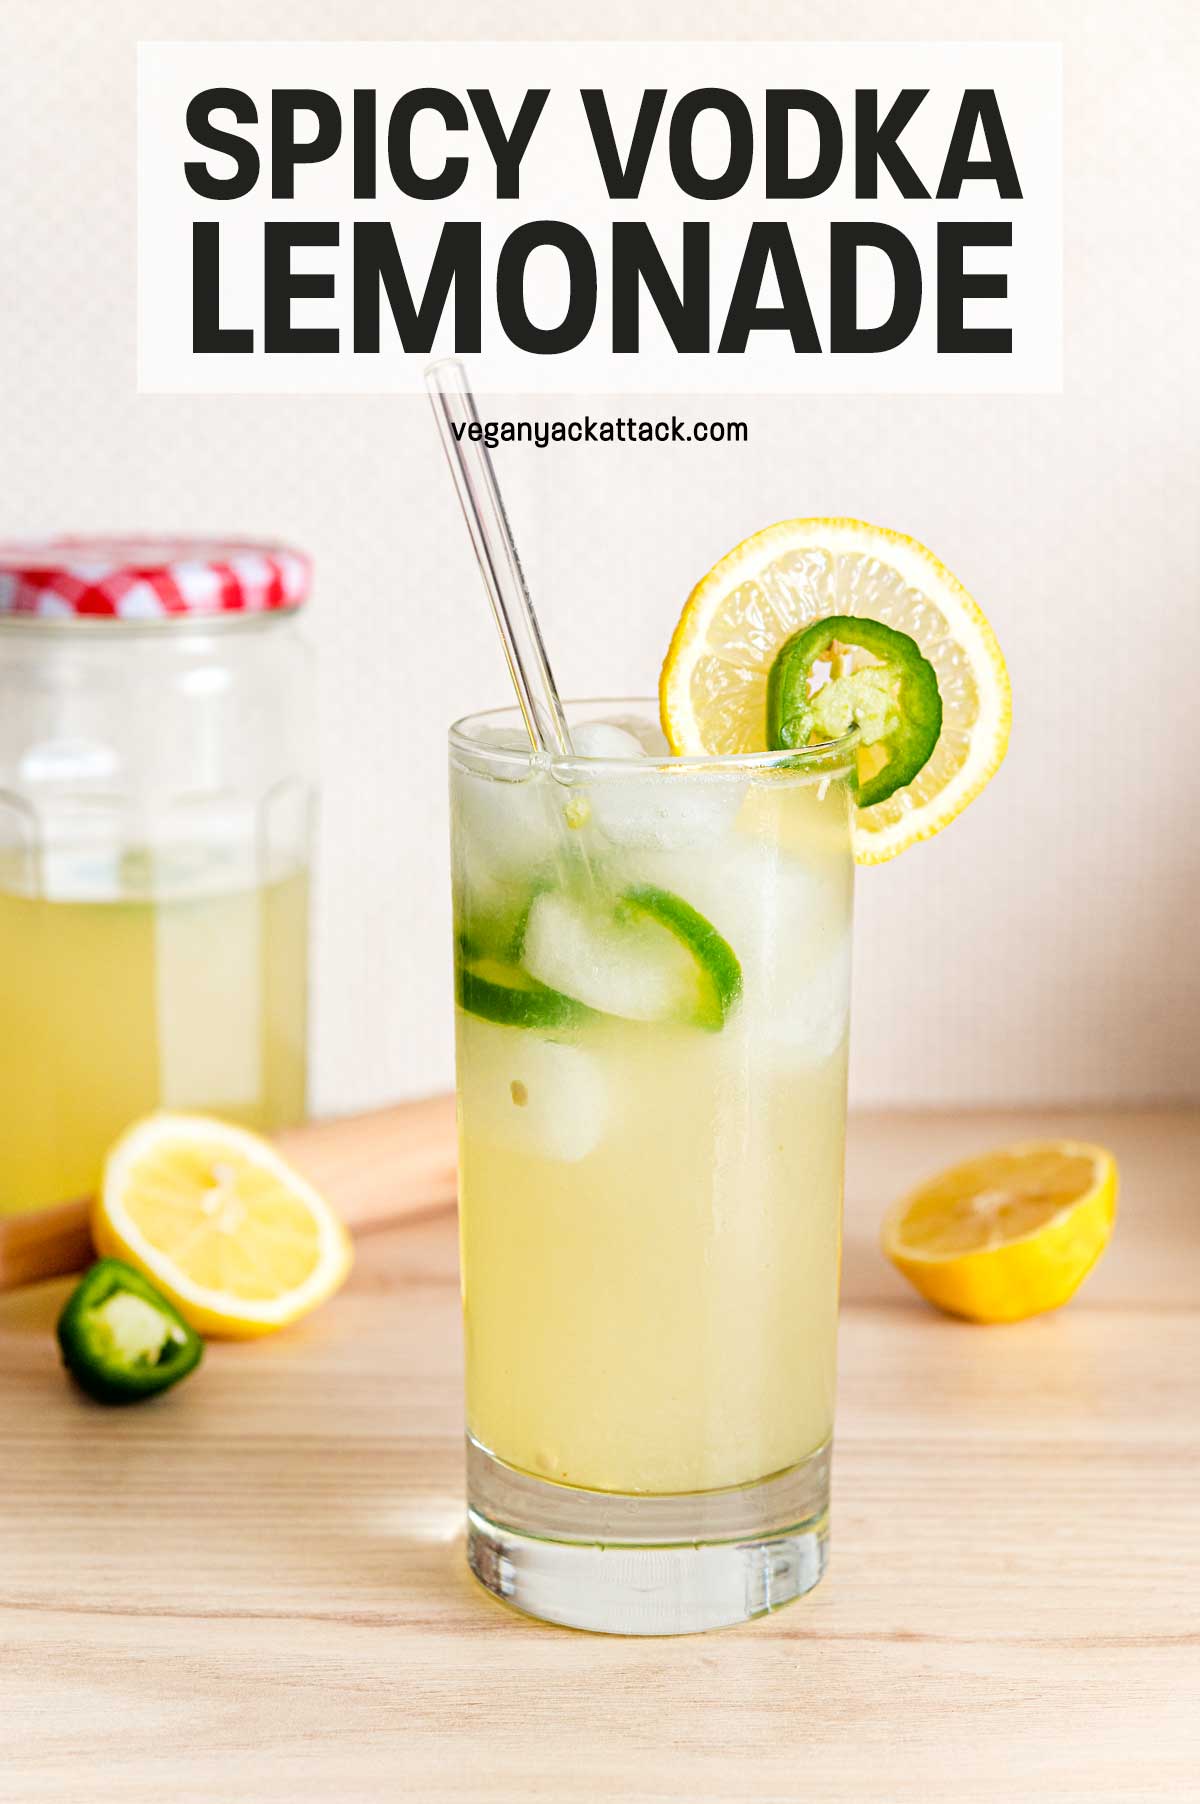 One glass of lemonade with jalapeño slices and ice in it, plus a jar of mix in the background